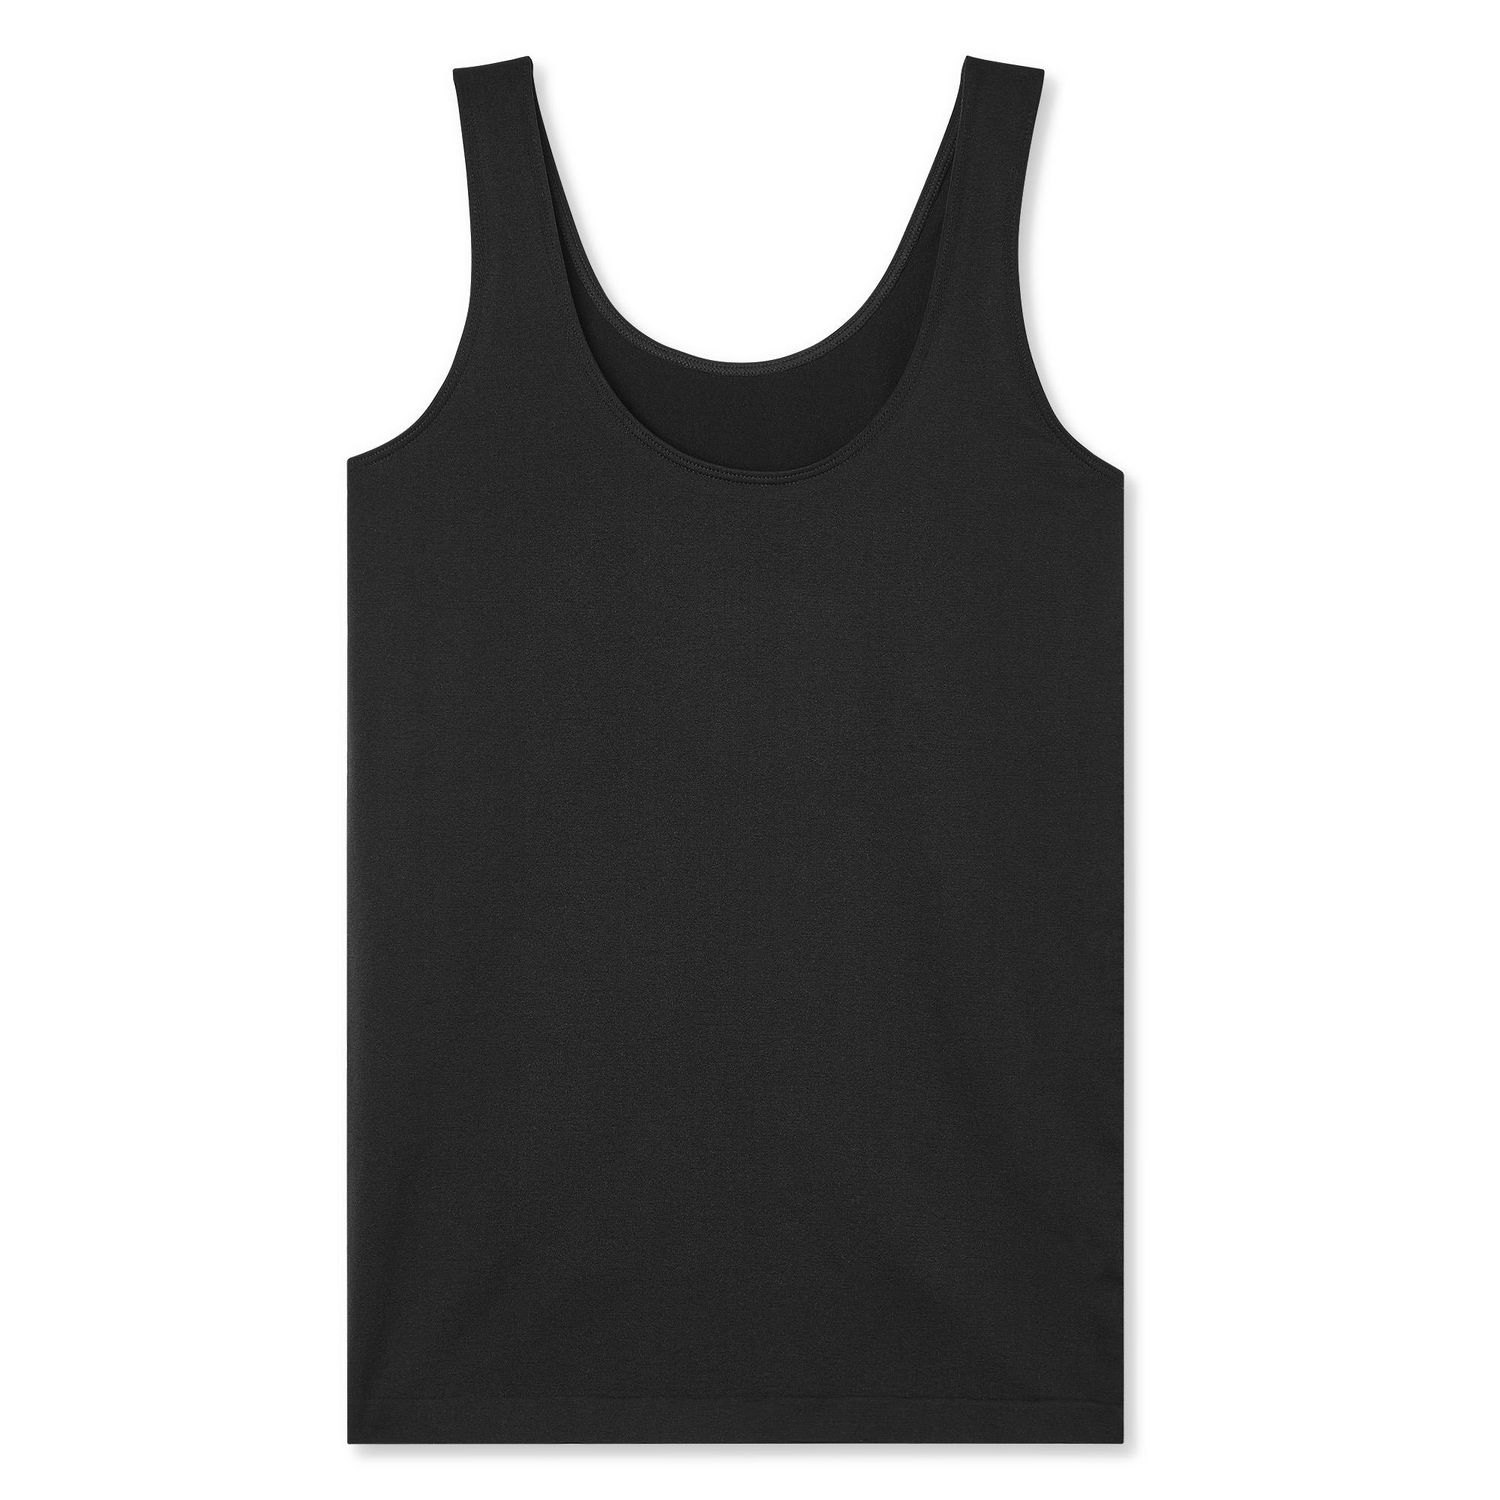 This Bestselling Walmart Active Tank Top Is Only $10